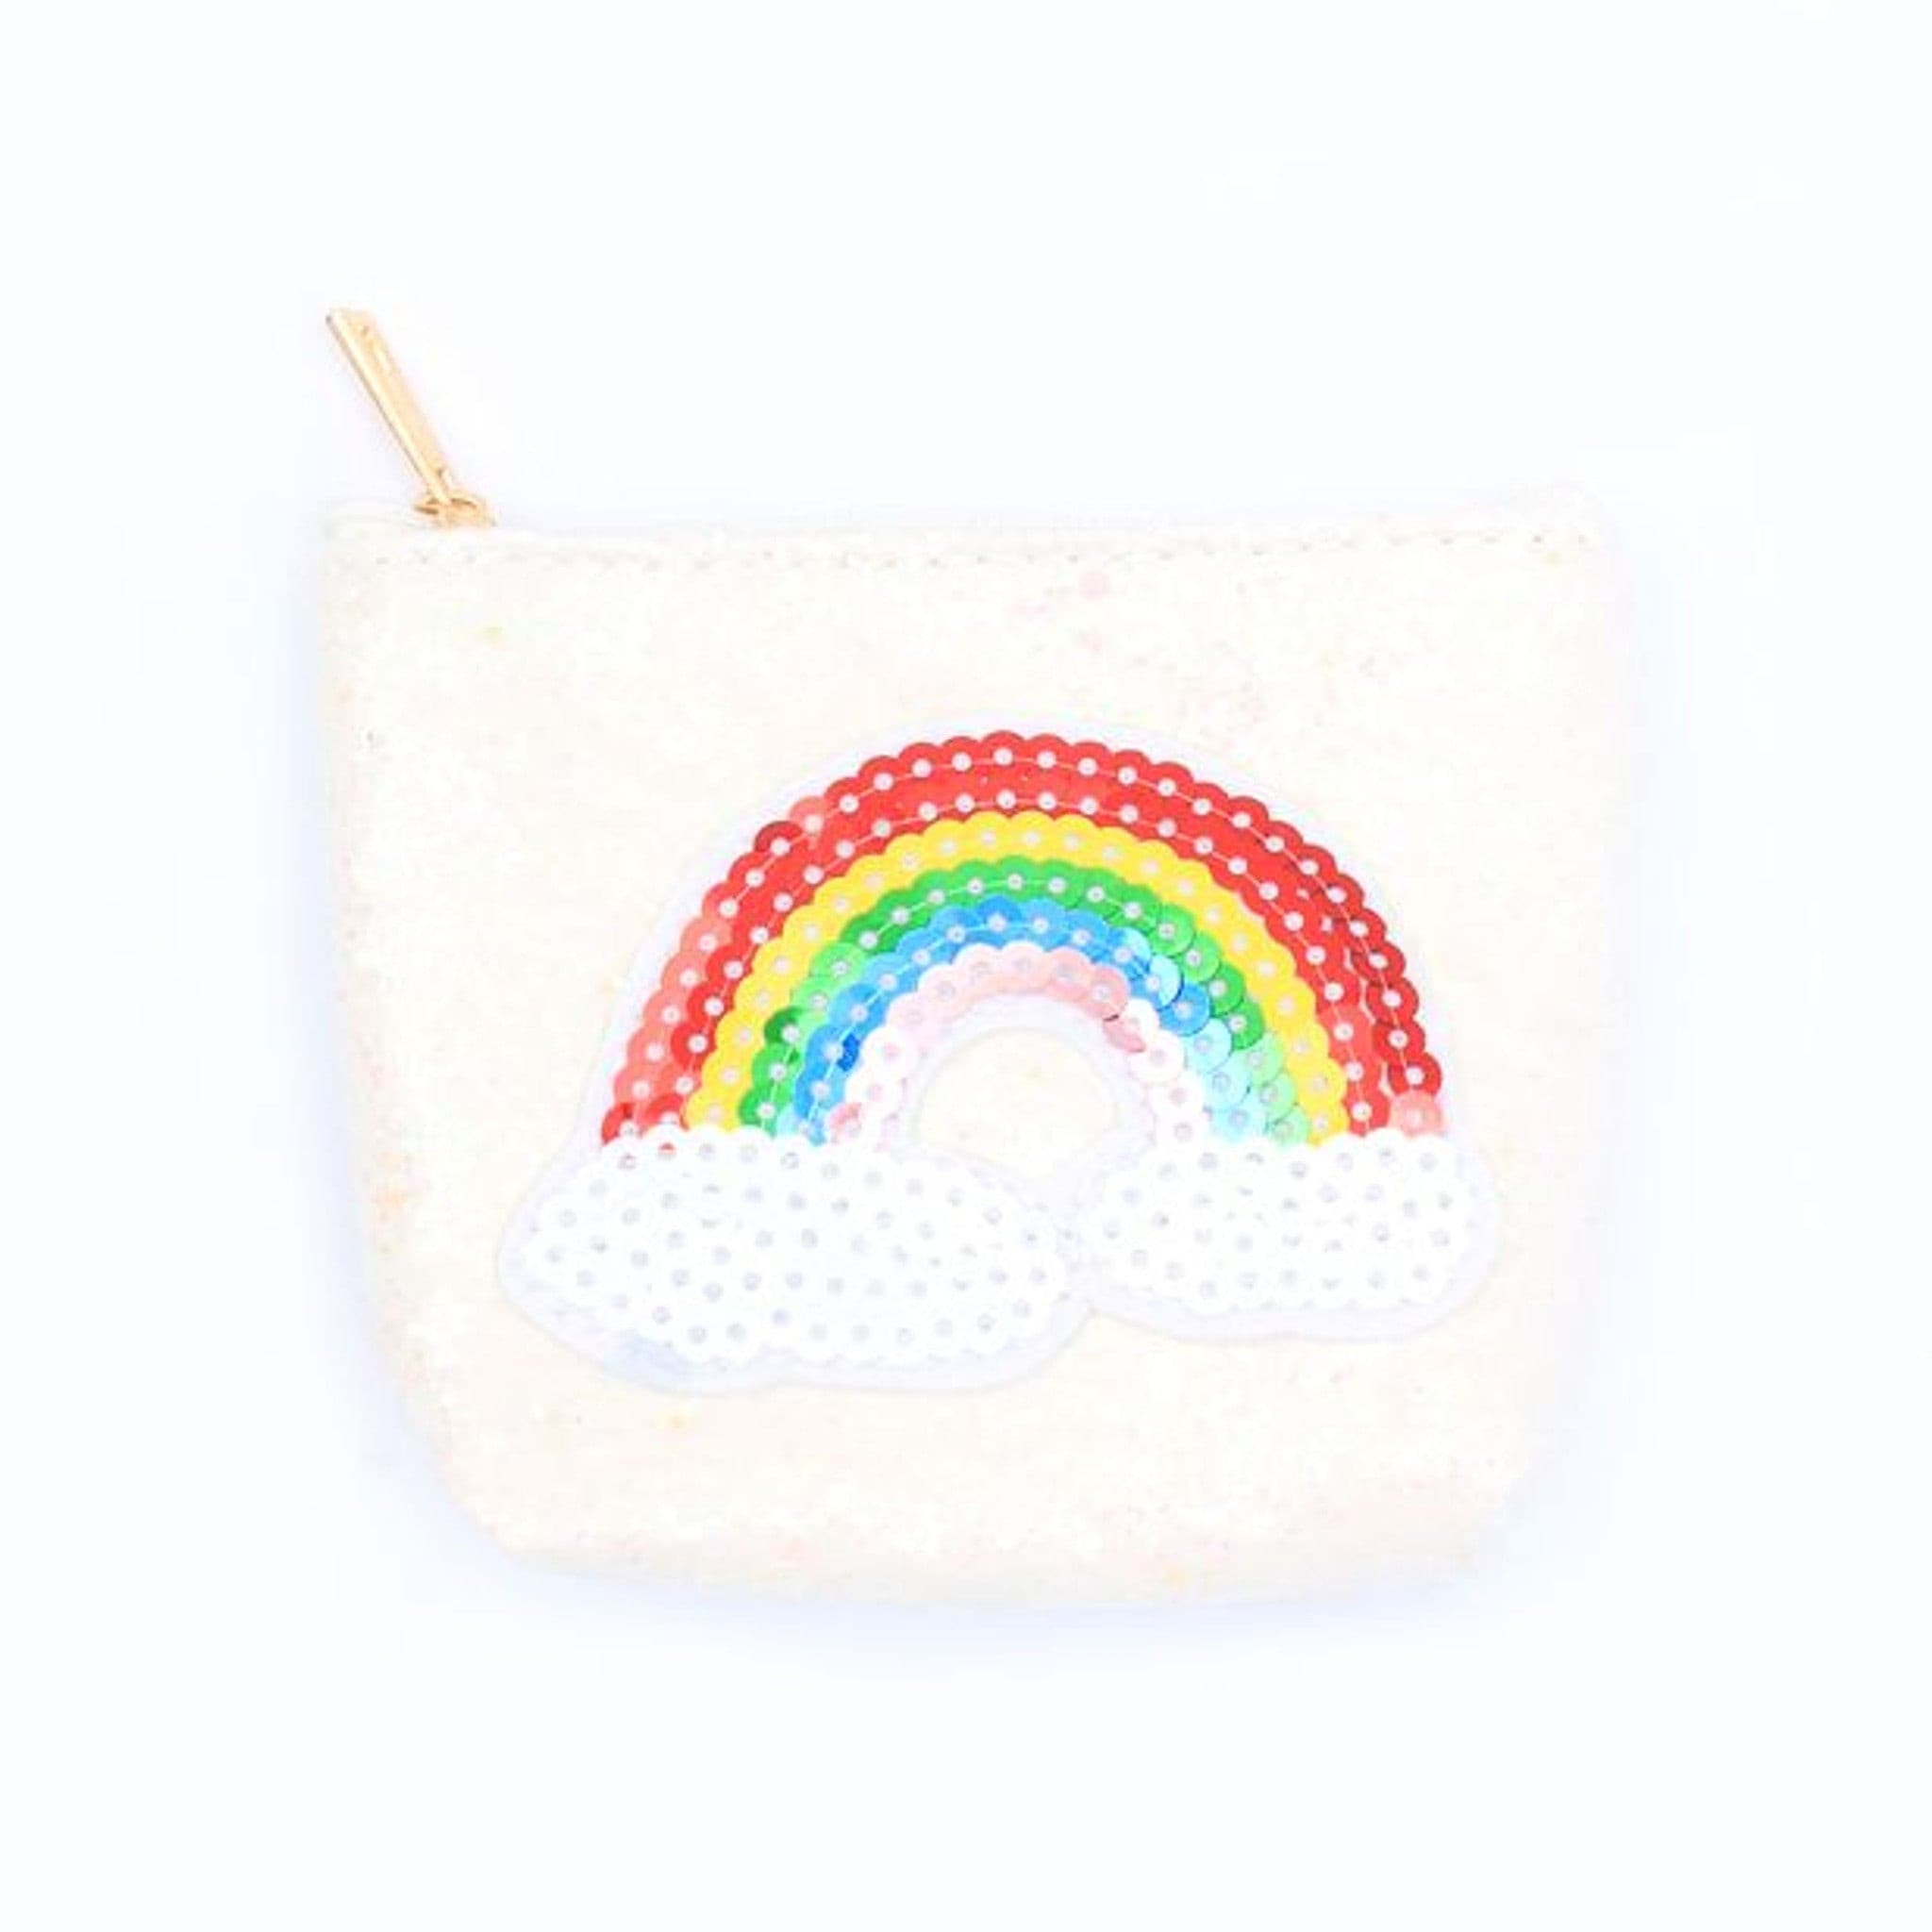 Glitter and Sequinned Rainbow Purse.